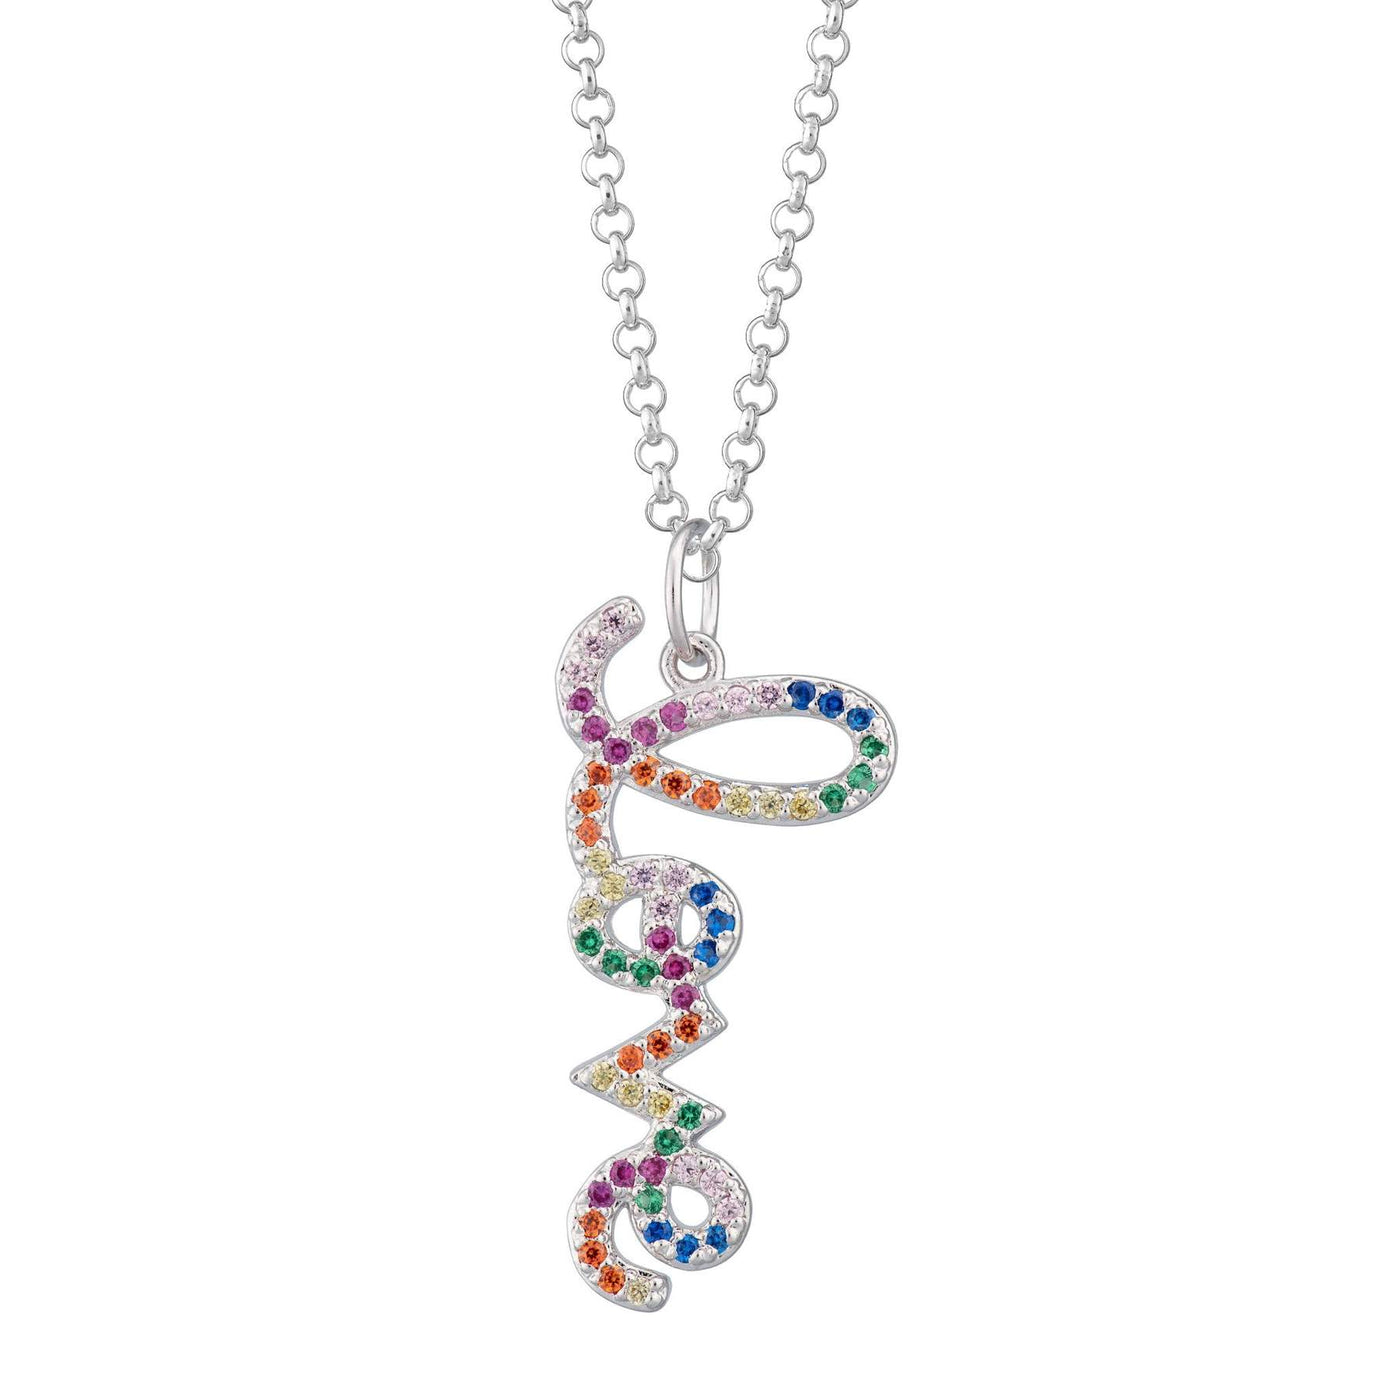 Rainbow Love Necklace in Silver Tones with Slider Clasp